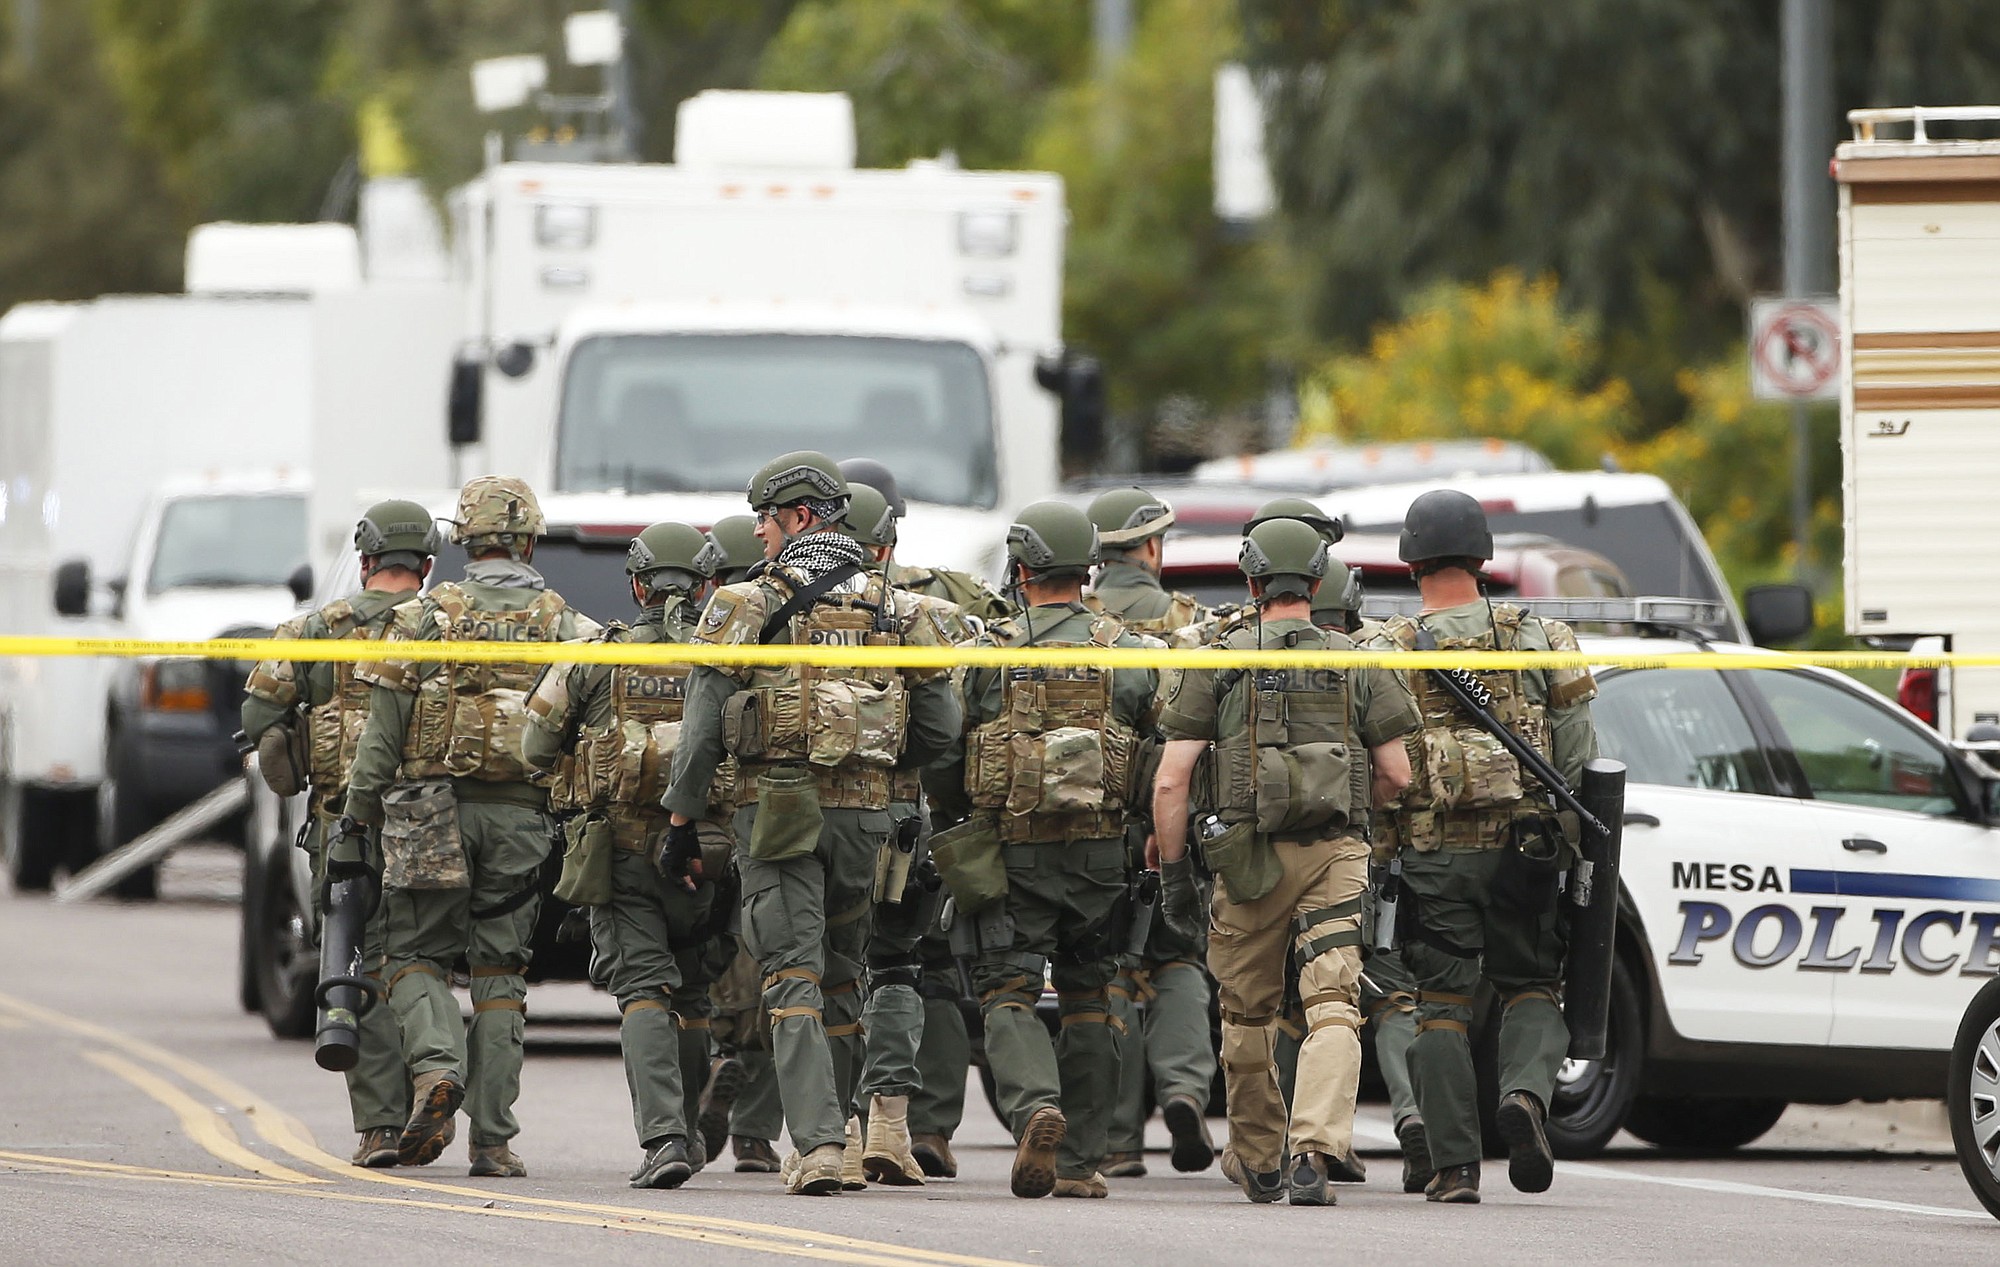 A SWAT team walks down the street near Adams Elementary School searching for a gunman on Wednesday, March 18, 2015 in Mesa, Ariz. A gunman wounded at least four people across multiple locations in the Phoenix suburb. The first shooting happened at a motel, and people were also wounded at a restaurant and nearby apartment complexes.